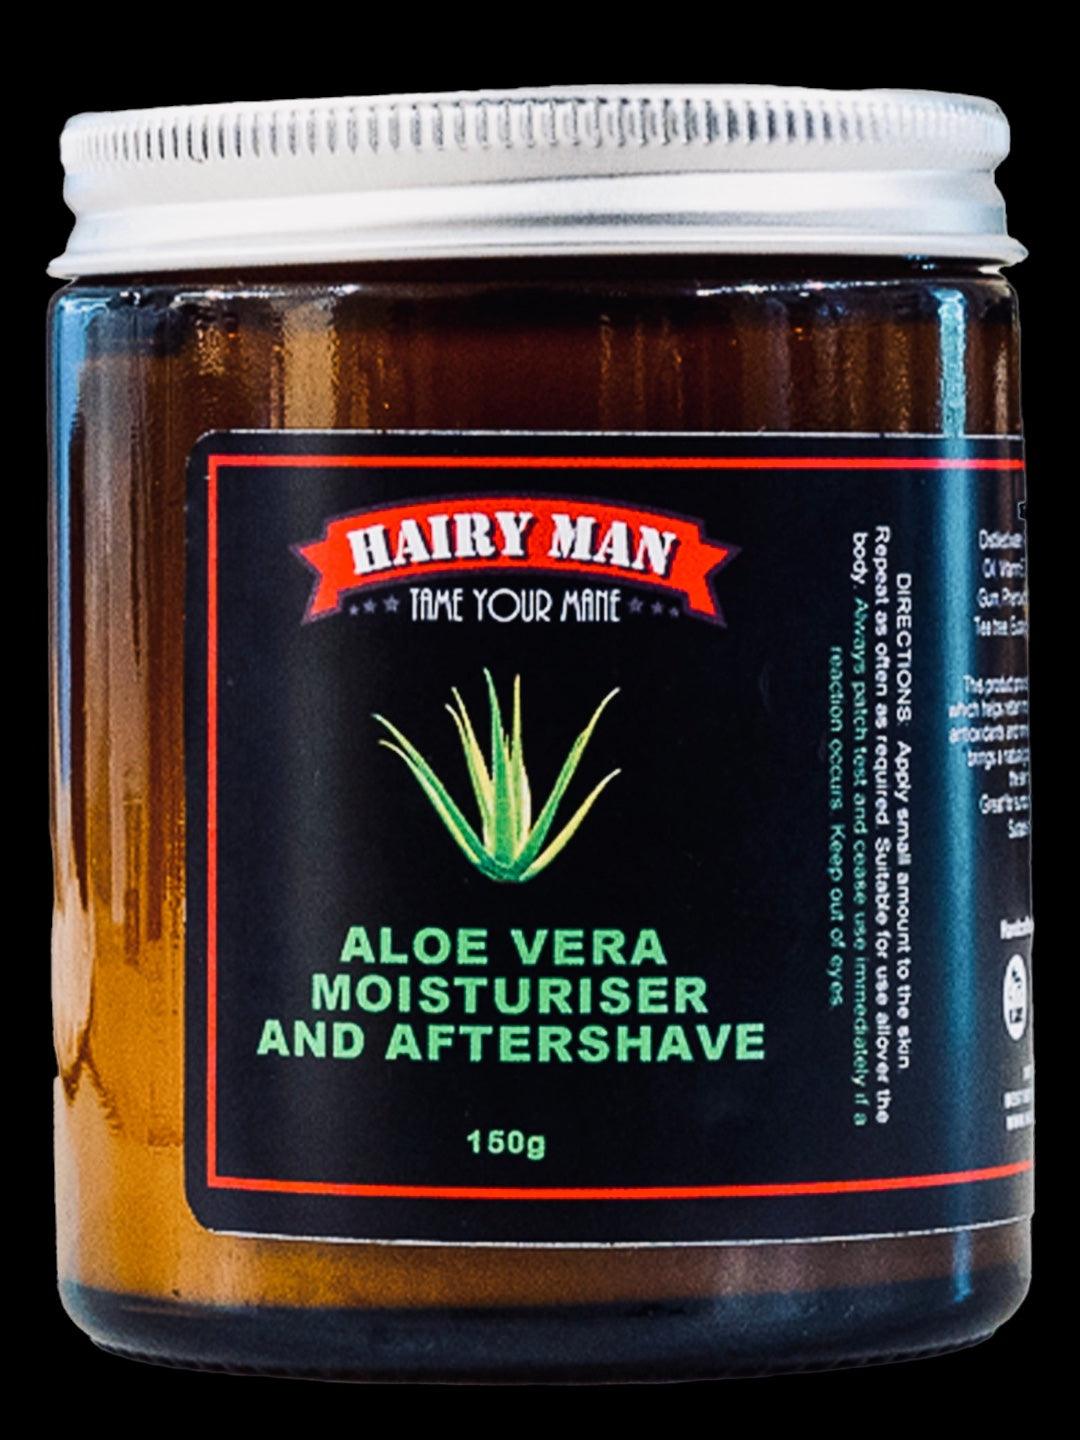 Aloe Vera Moisturizer And Aftershave 150G - Hairy Man Care